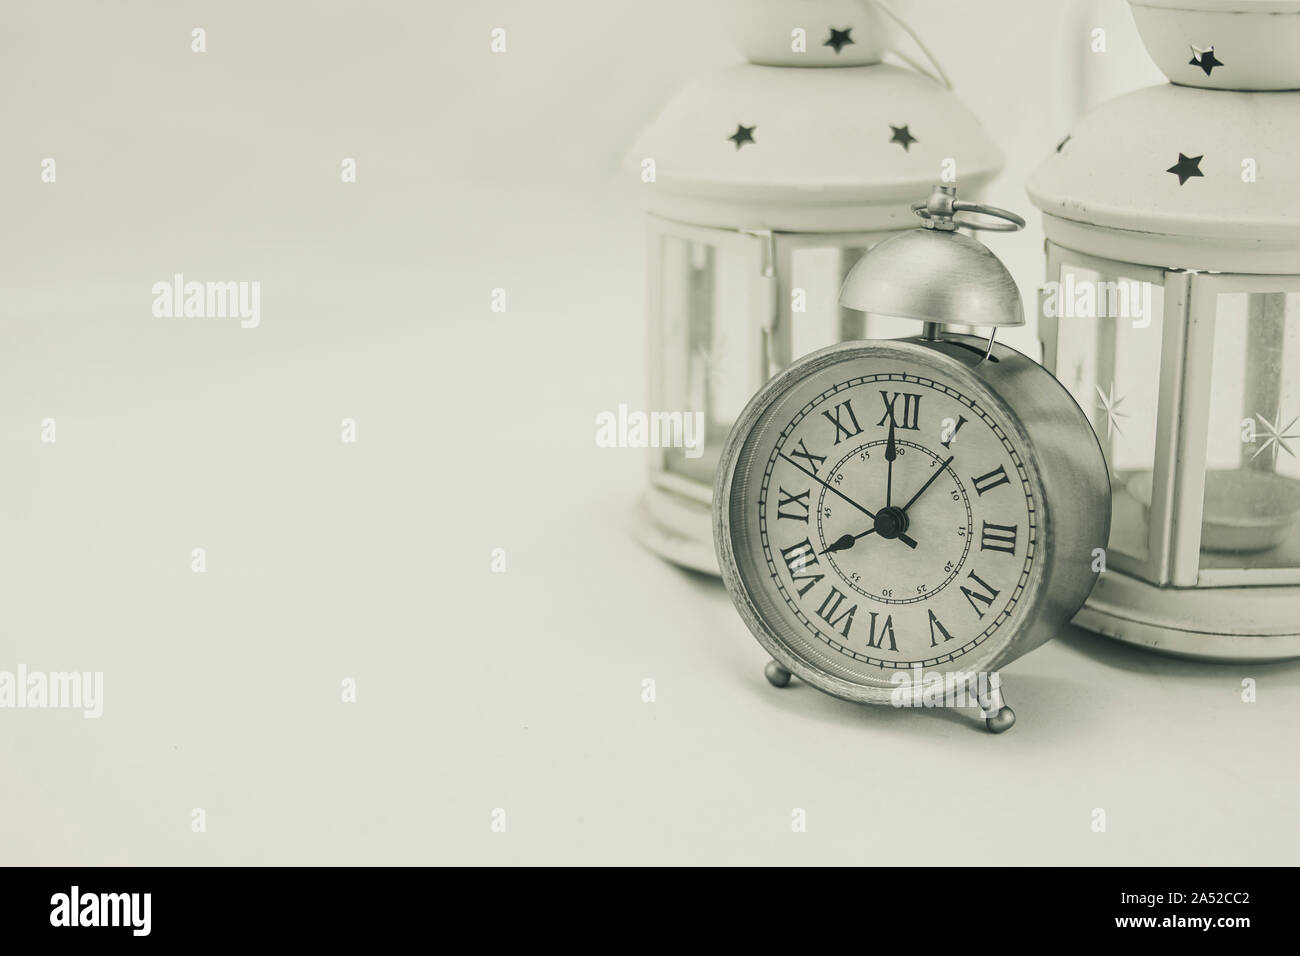 Classic gray alarm clock with two white lanterns candle holders on white background Stock Photo